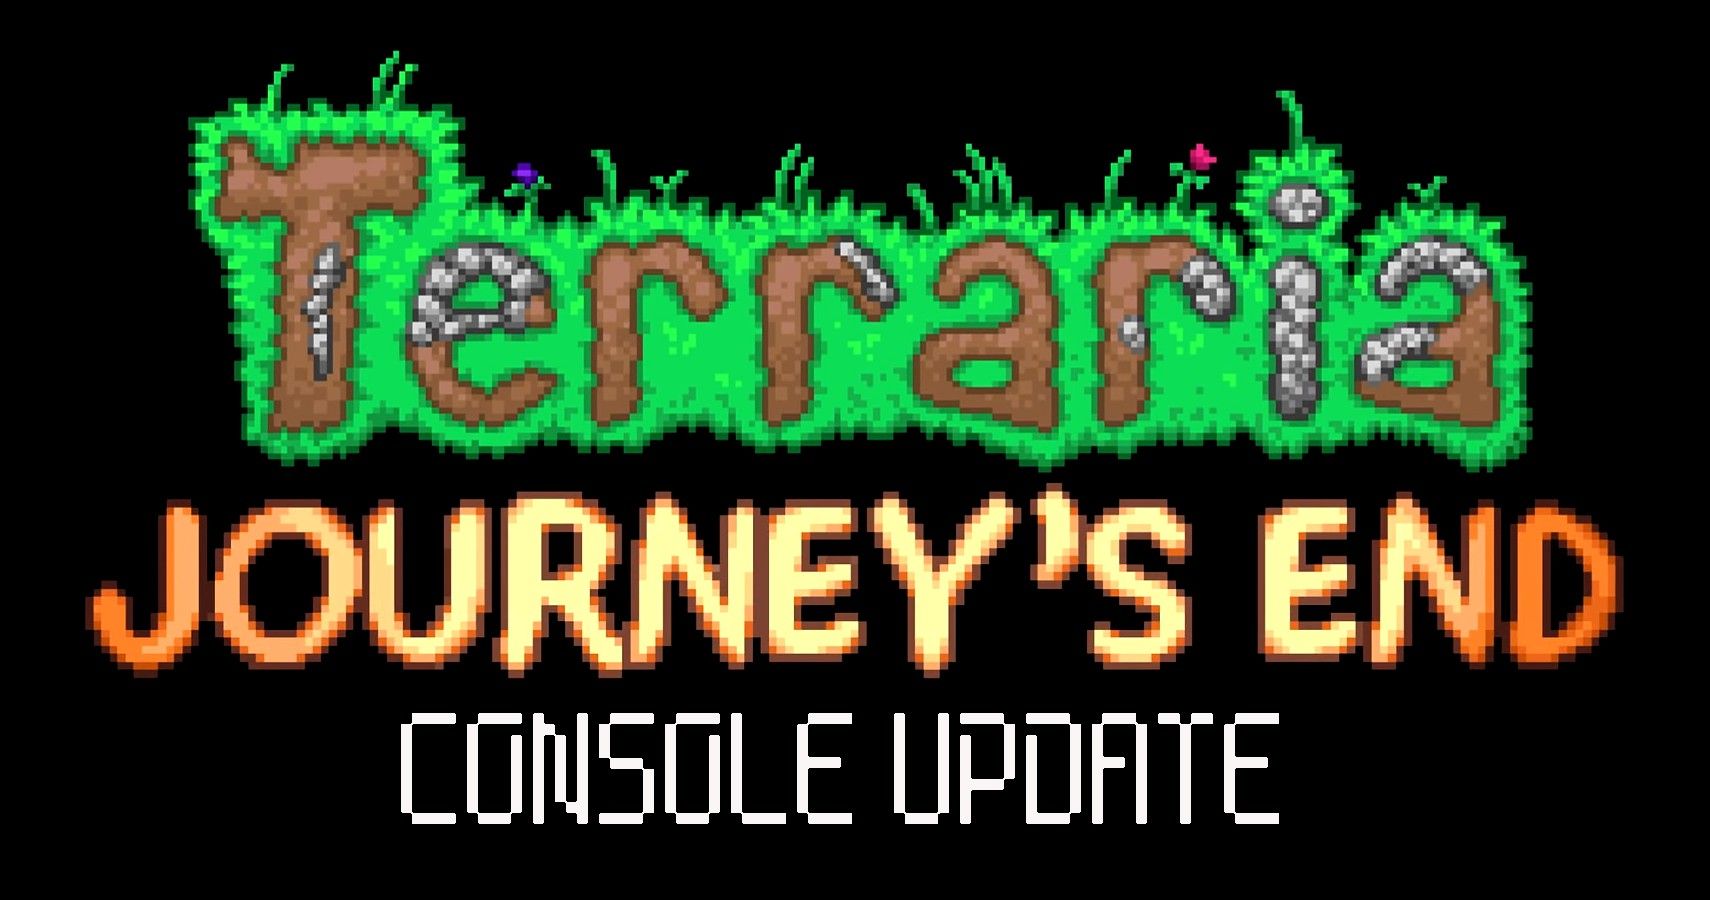 Terraria 1.4.5 Release Date, Spoilers Update, and Early Patch